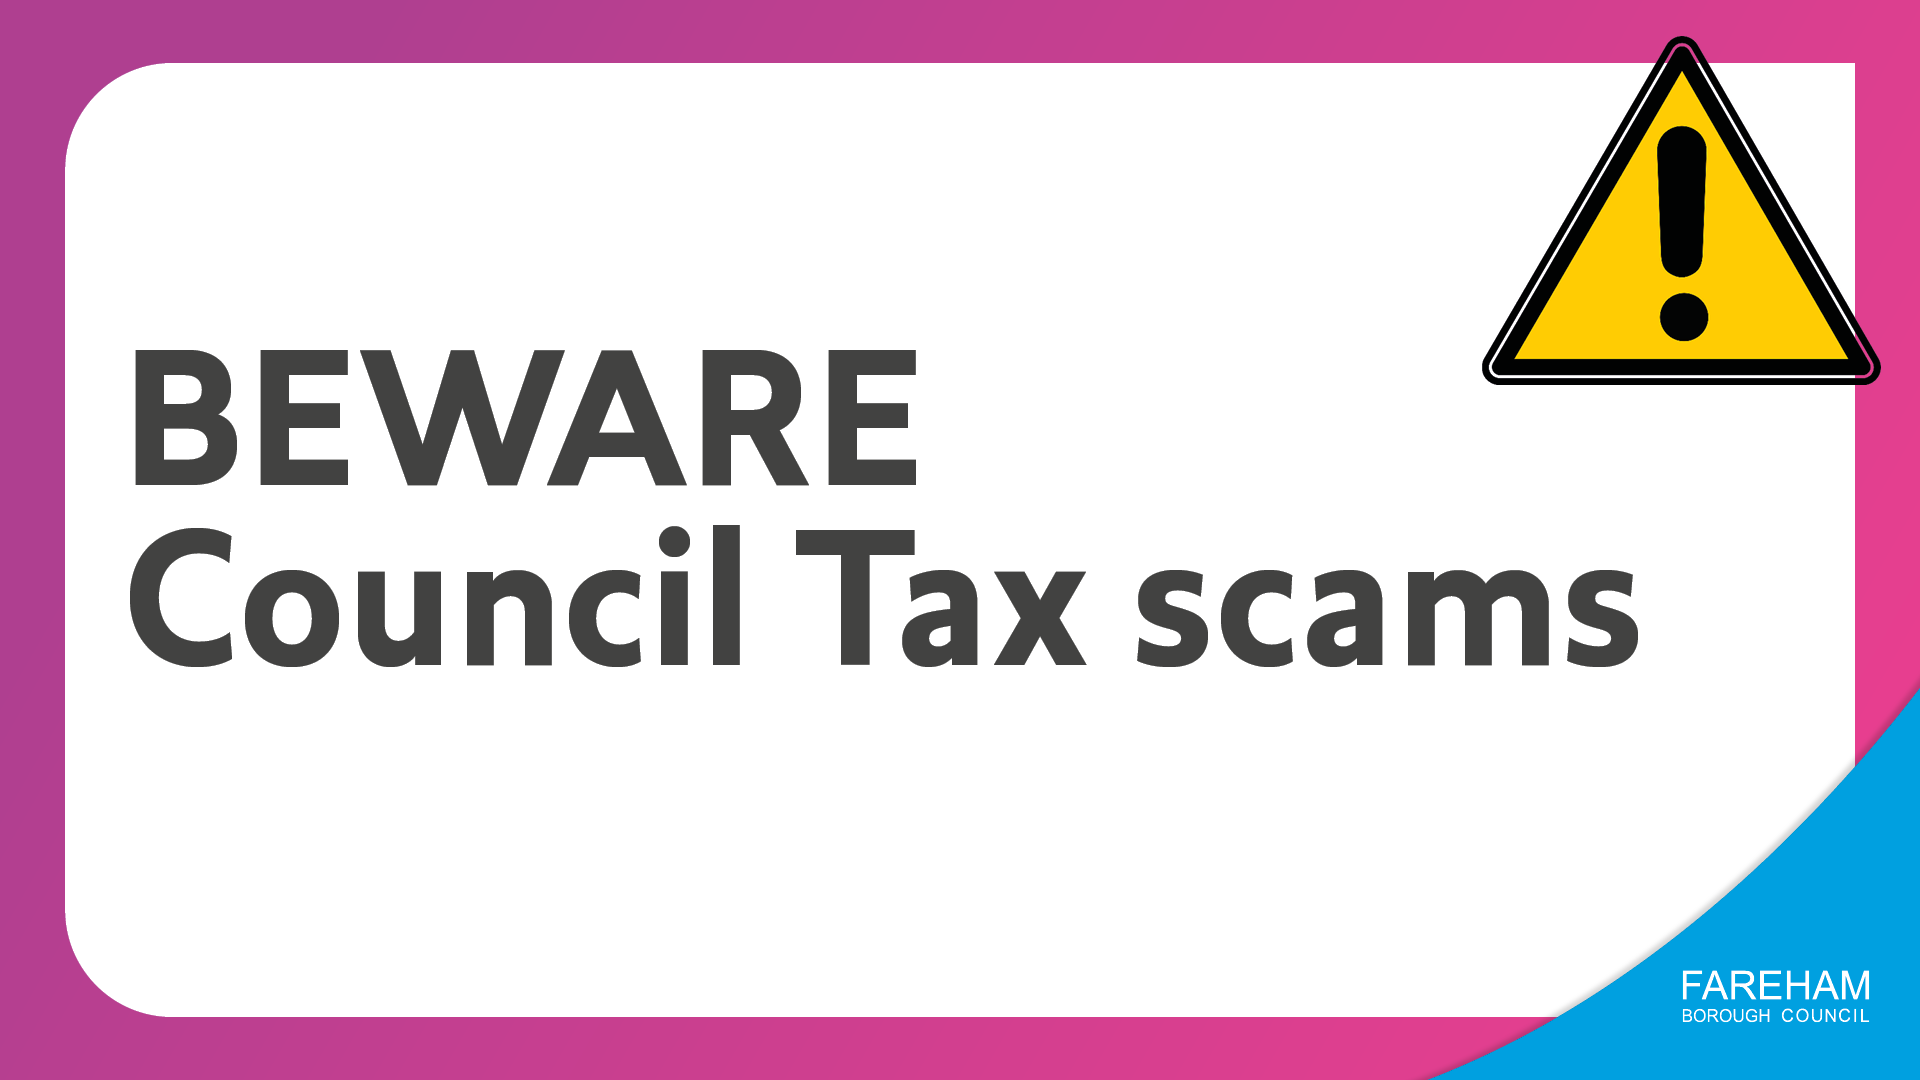 Beware of Council Tax scams